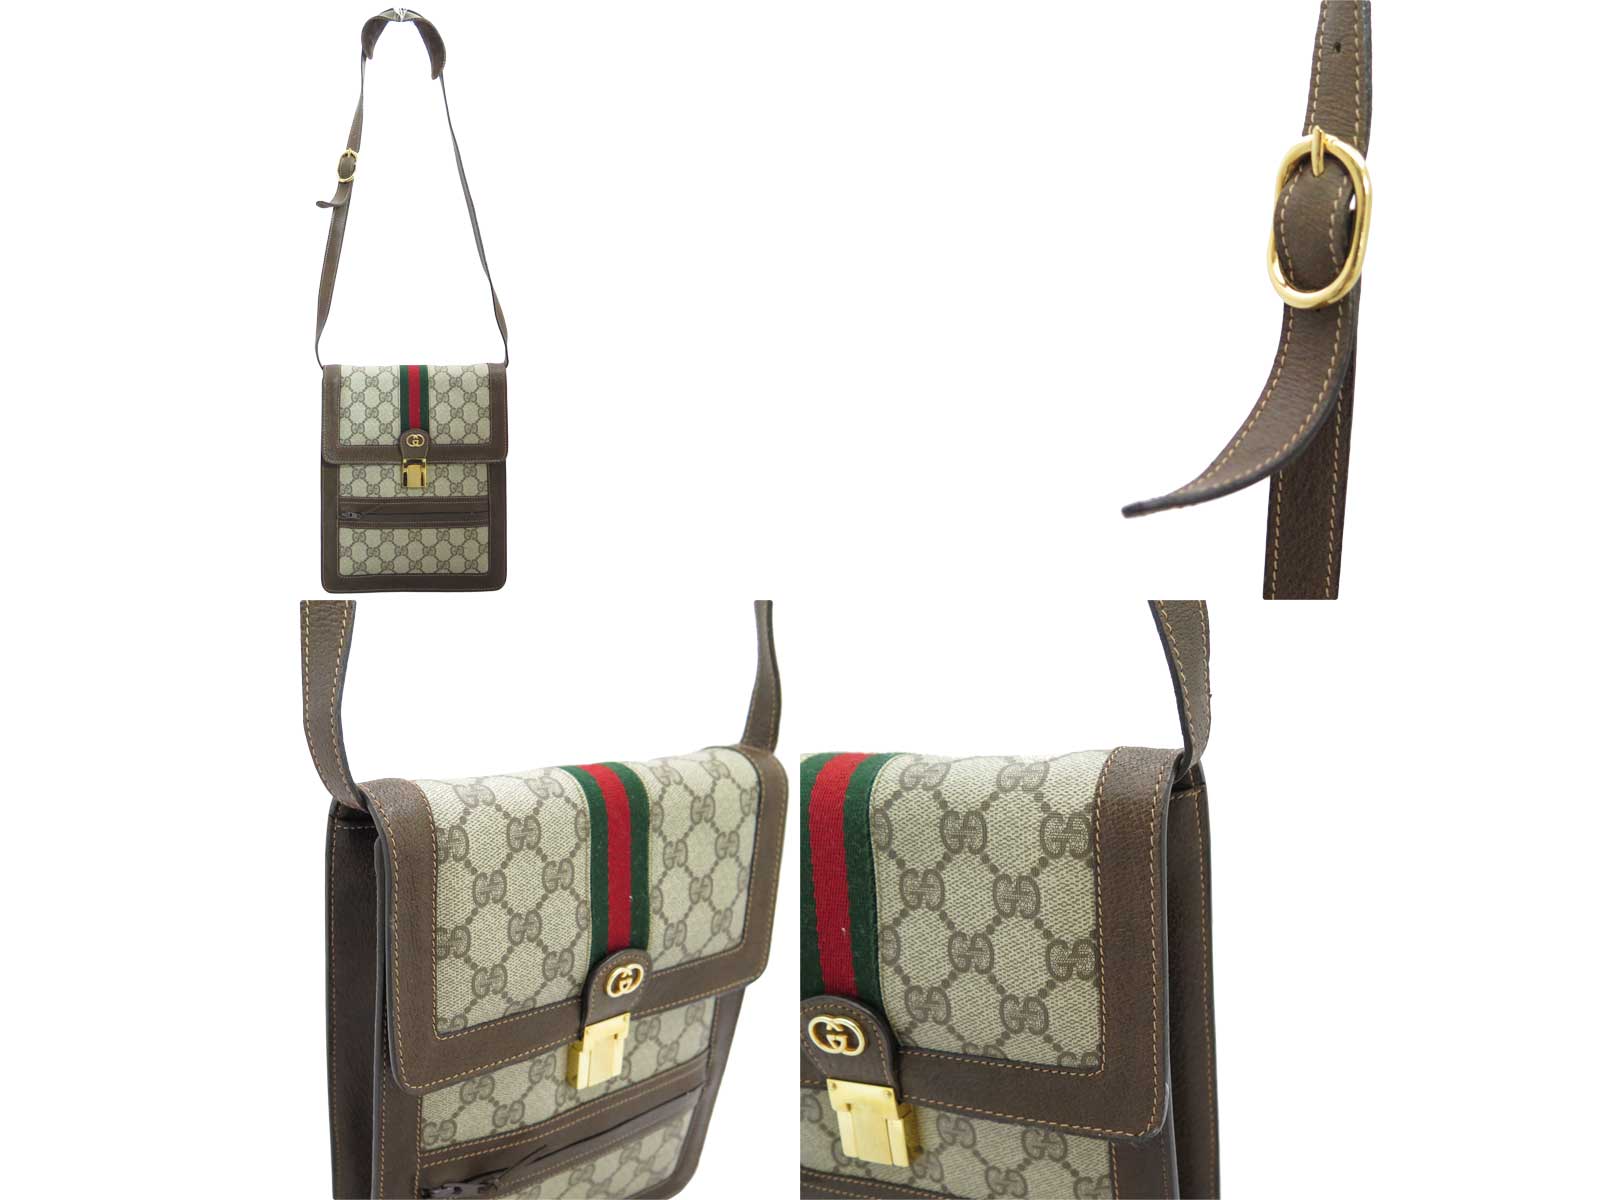 Gucci Parfums Bag Price | Confederated Tribes of the Umatilla Indian Reservation